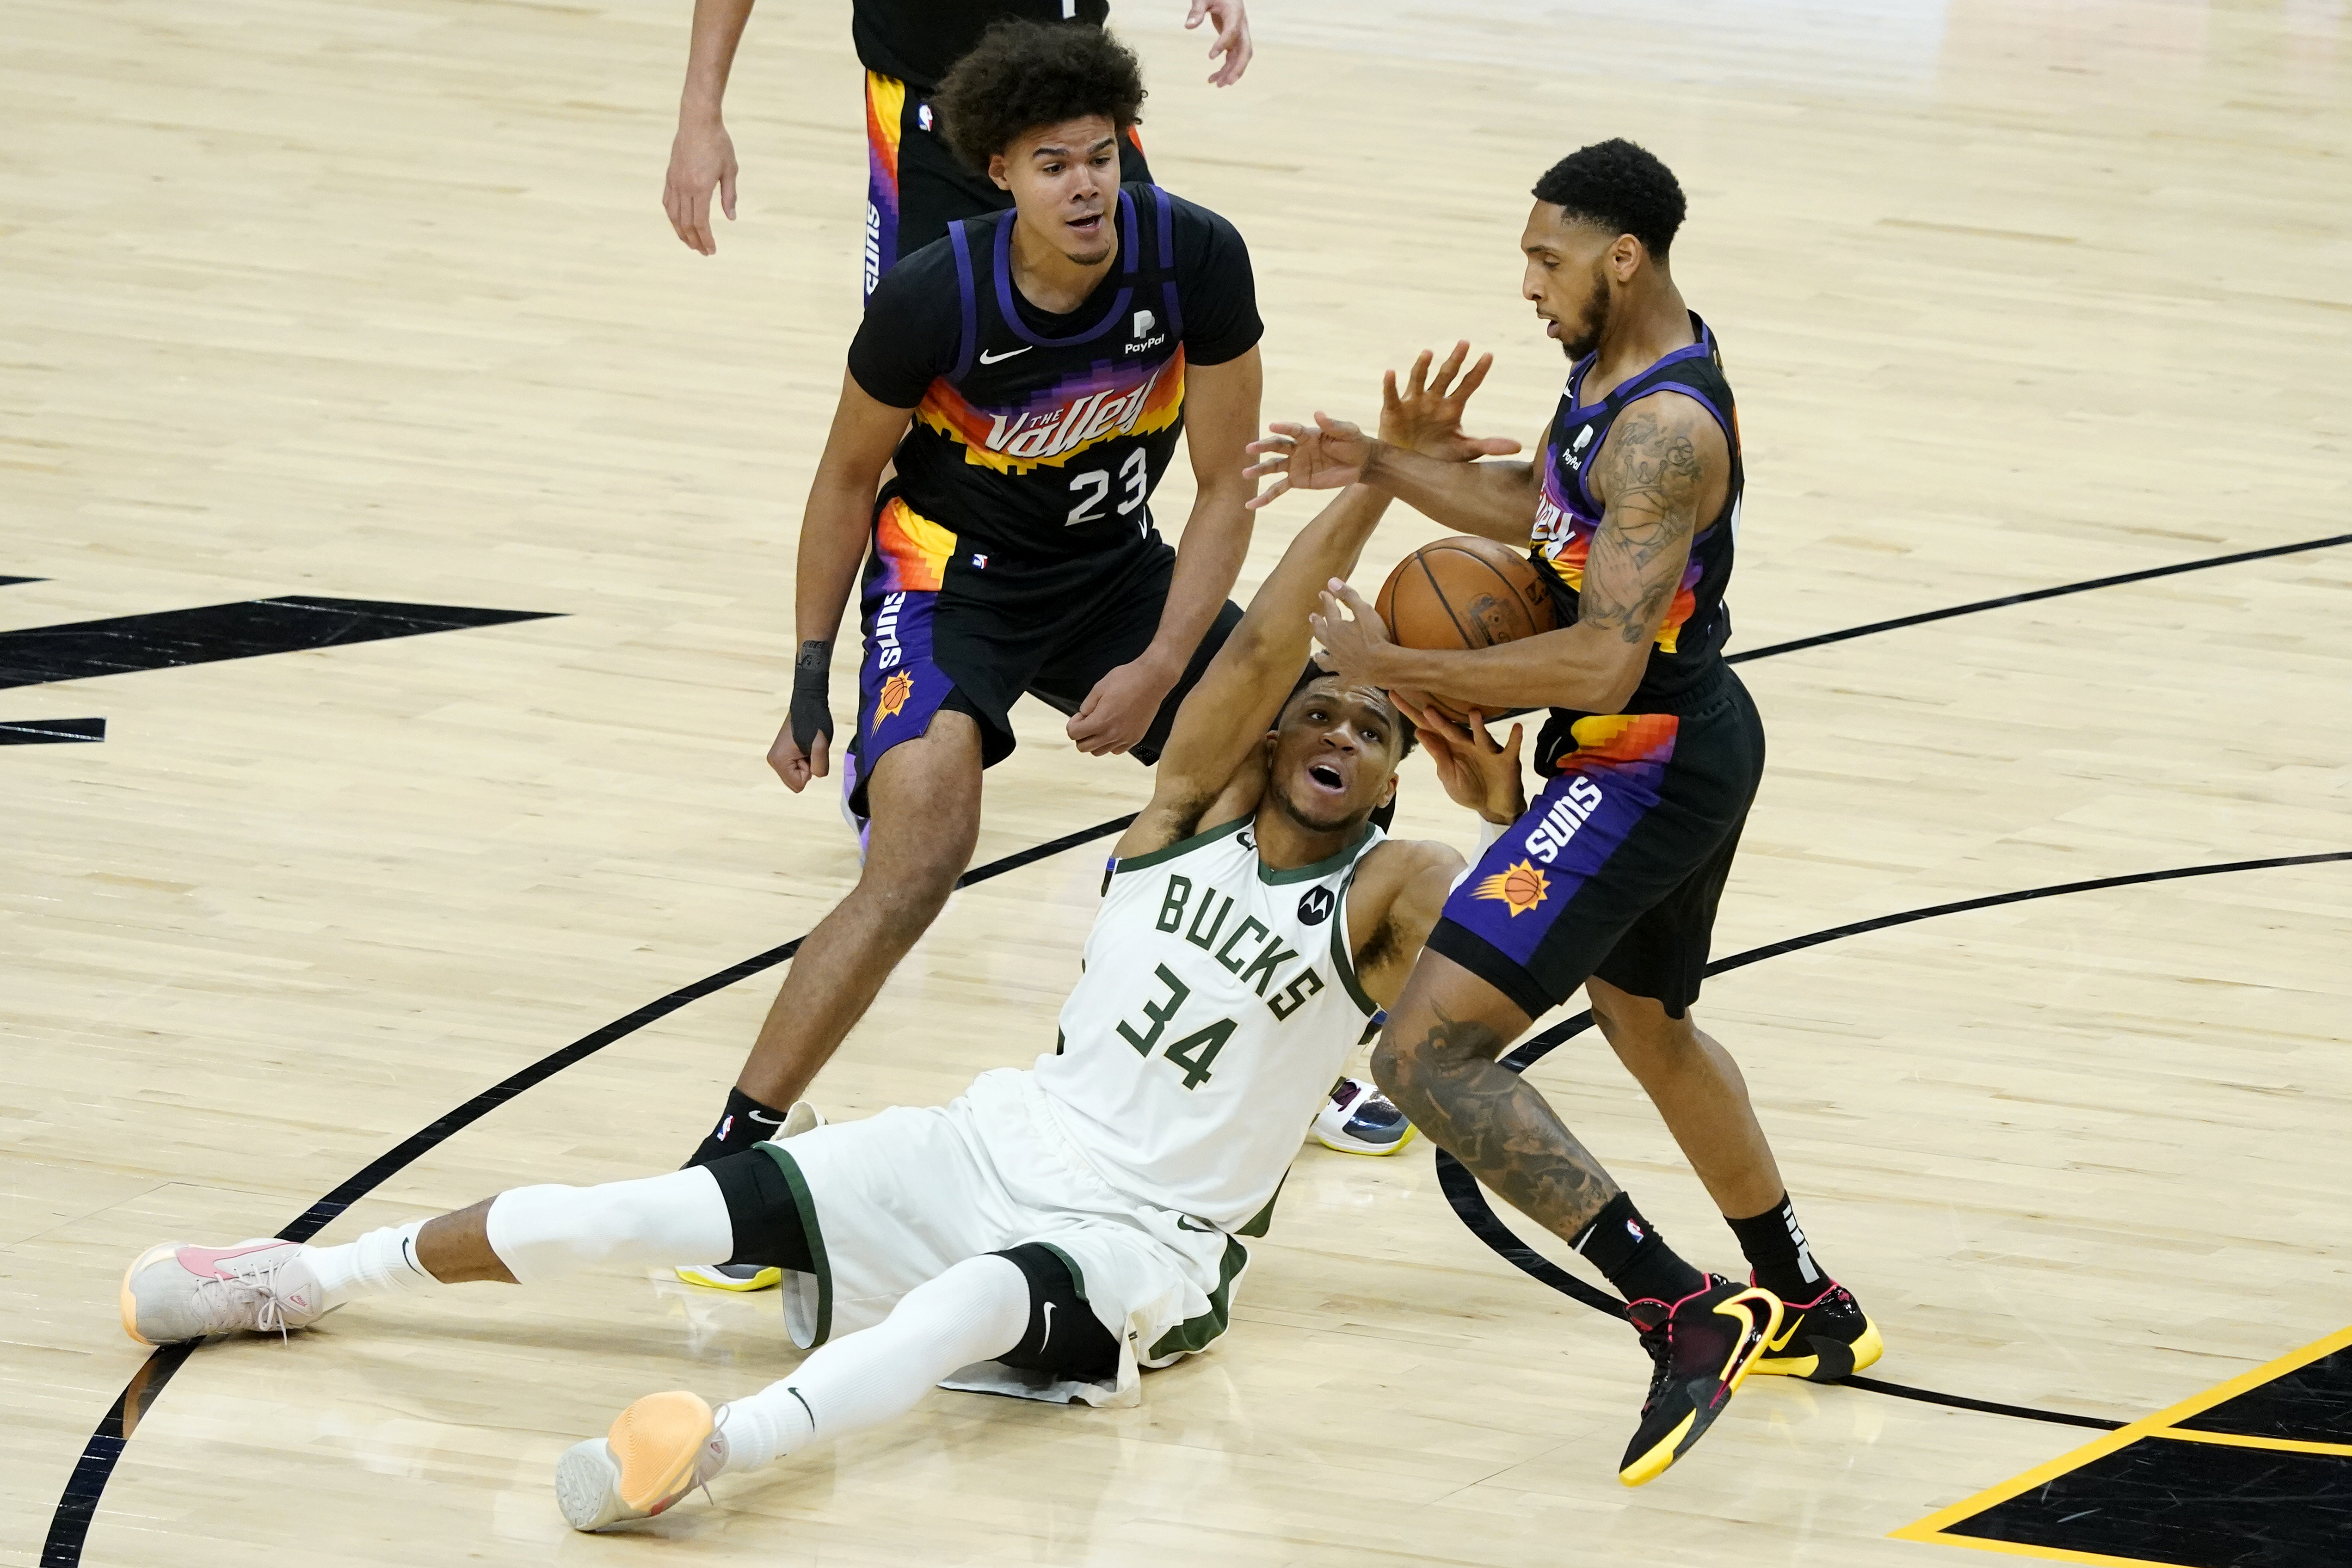 Halfway there: Suns beat Bucks for 2-0 lead in NBA Finals